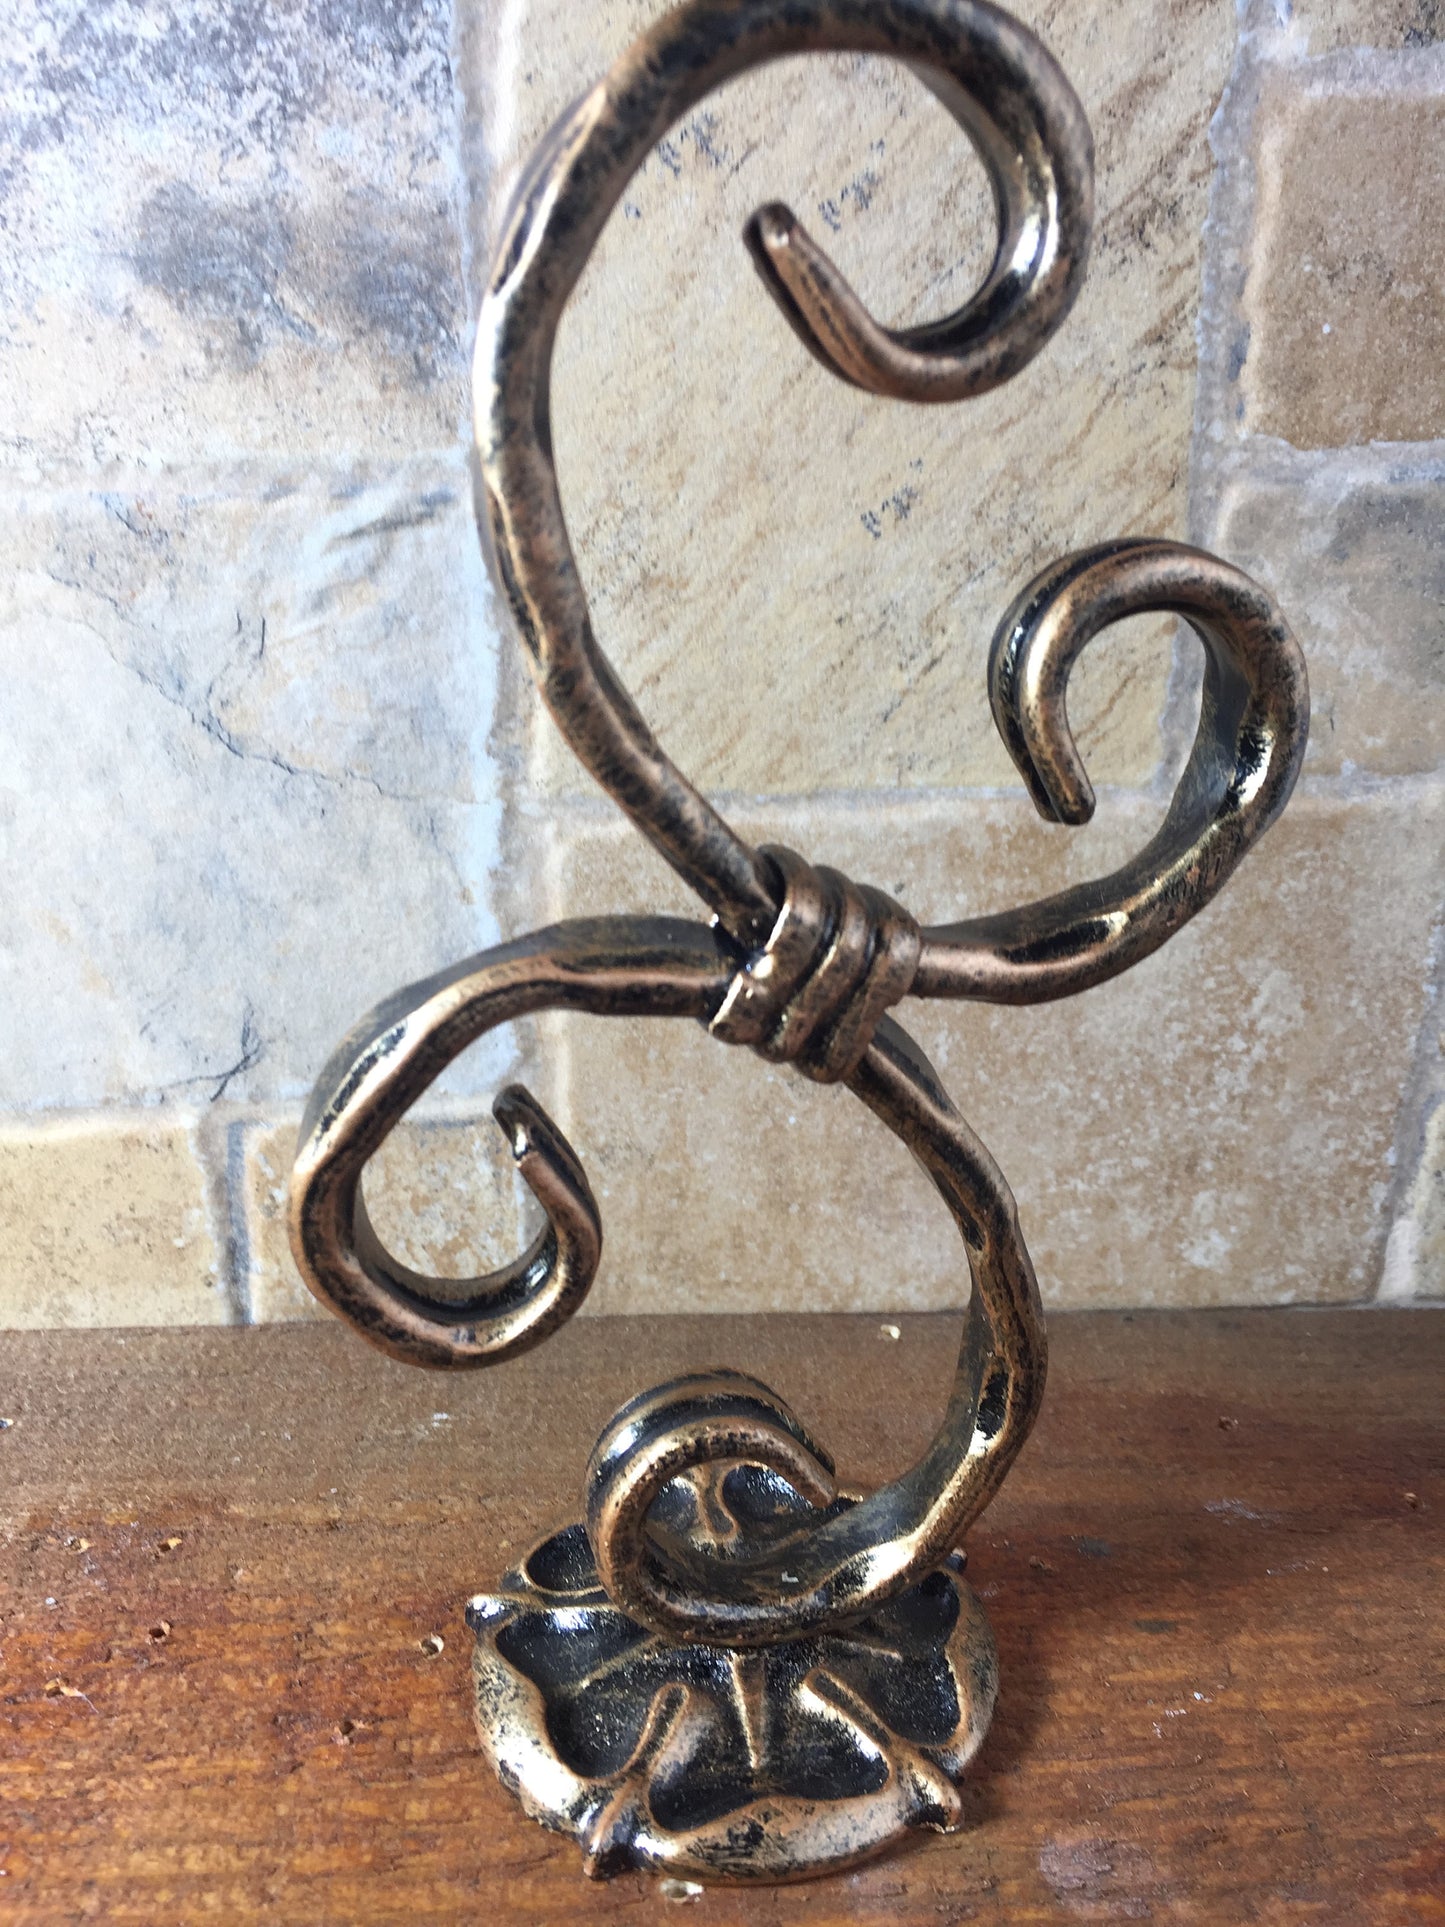 6 year anniversary,iron anniversary gift for her,metal candle holder,iron gift for her,candlestick holder,iron gift,wedding anniversary gift